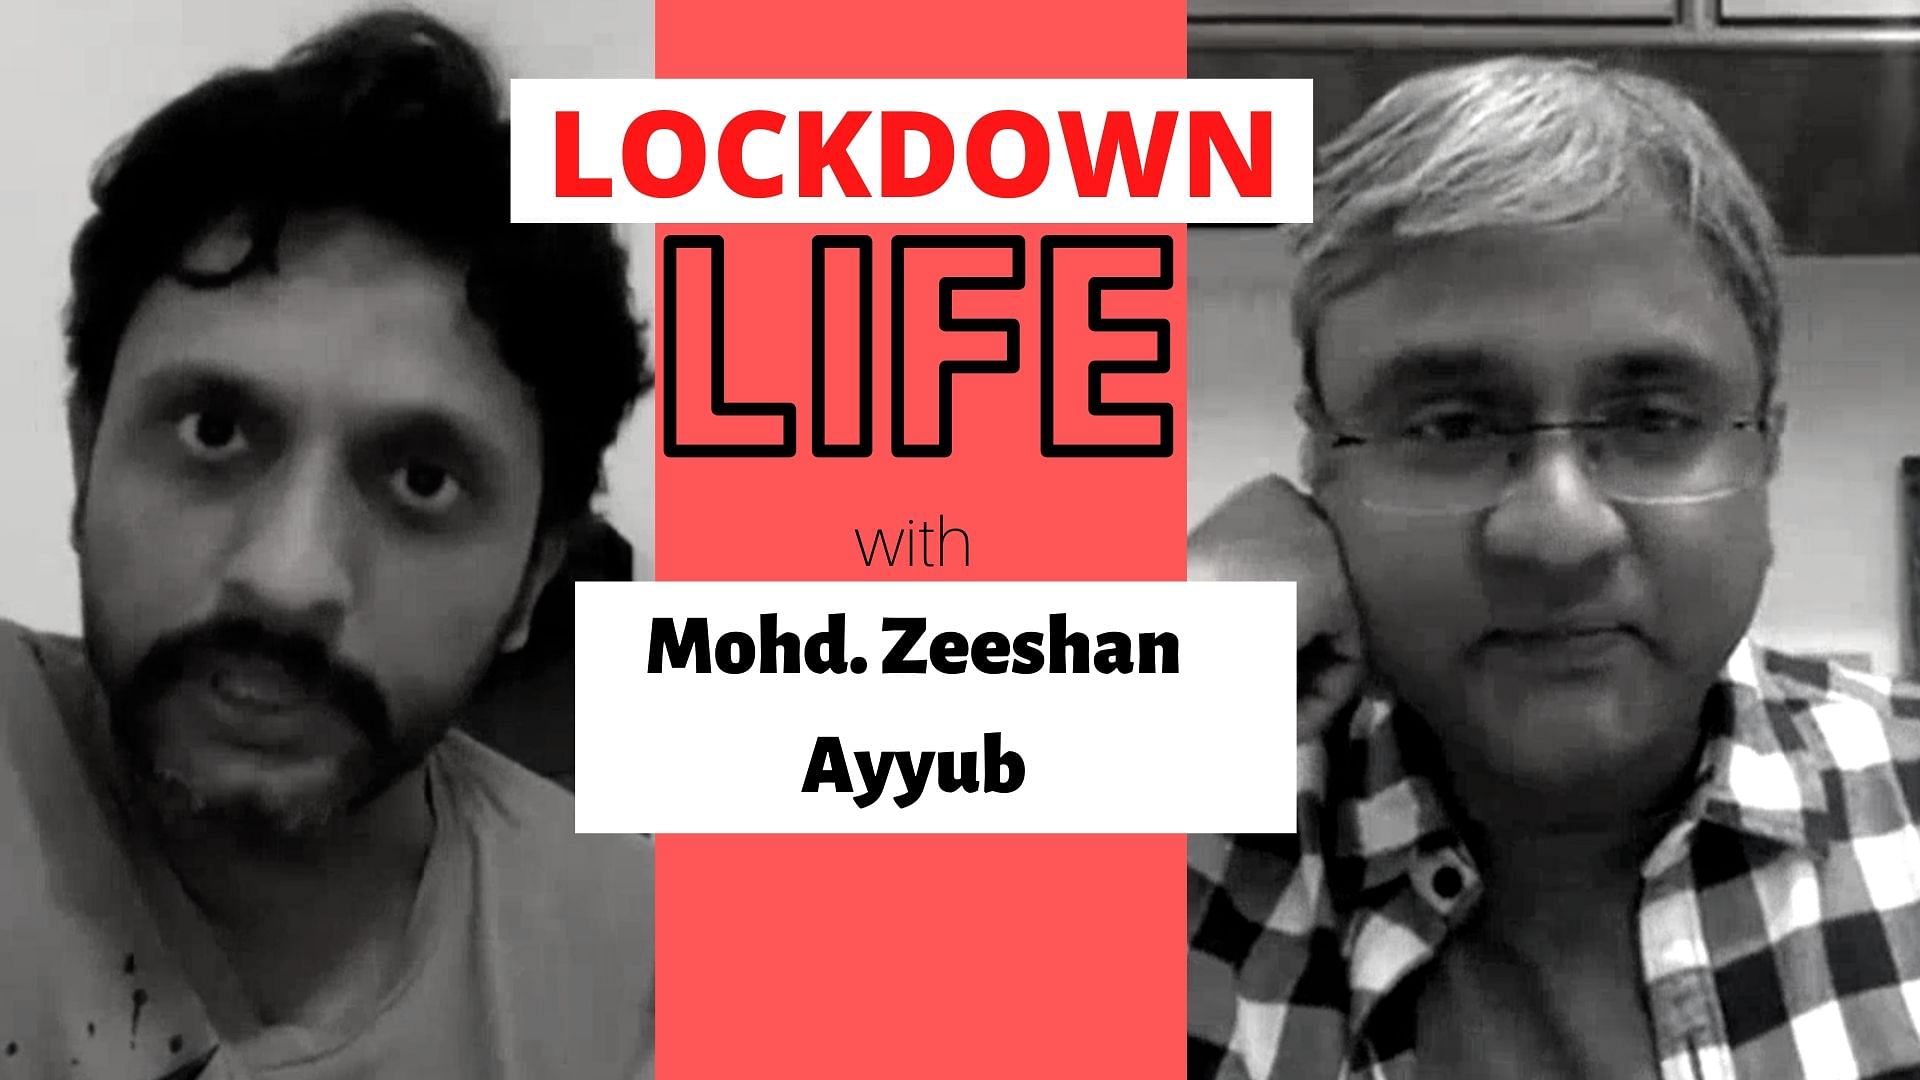 A video chat with actor Mohammed Zeeshan Ayyub.